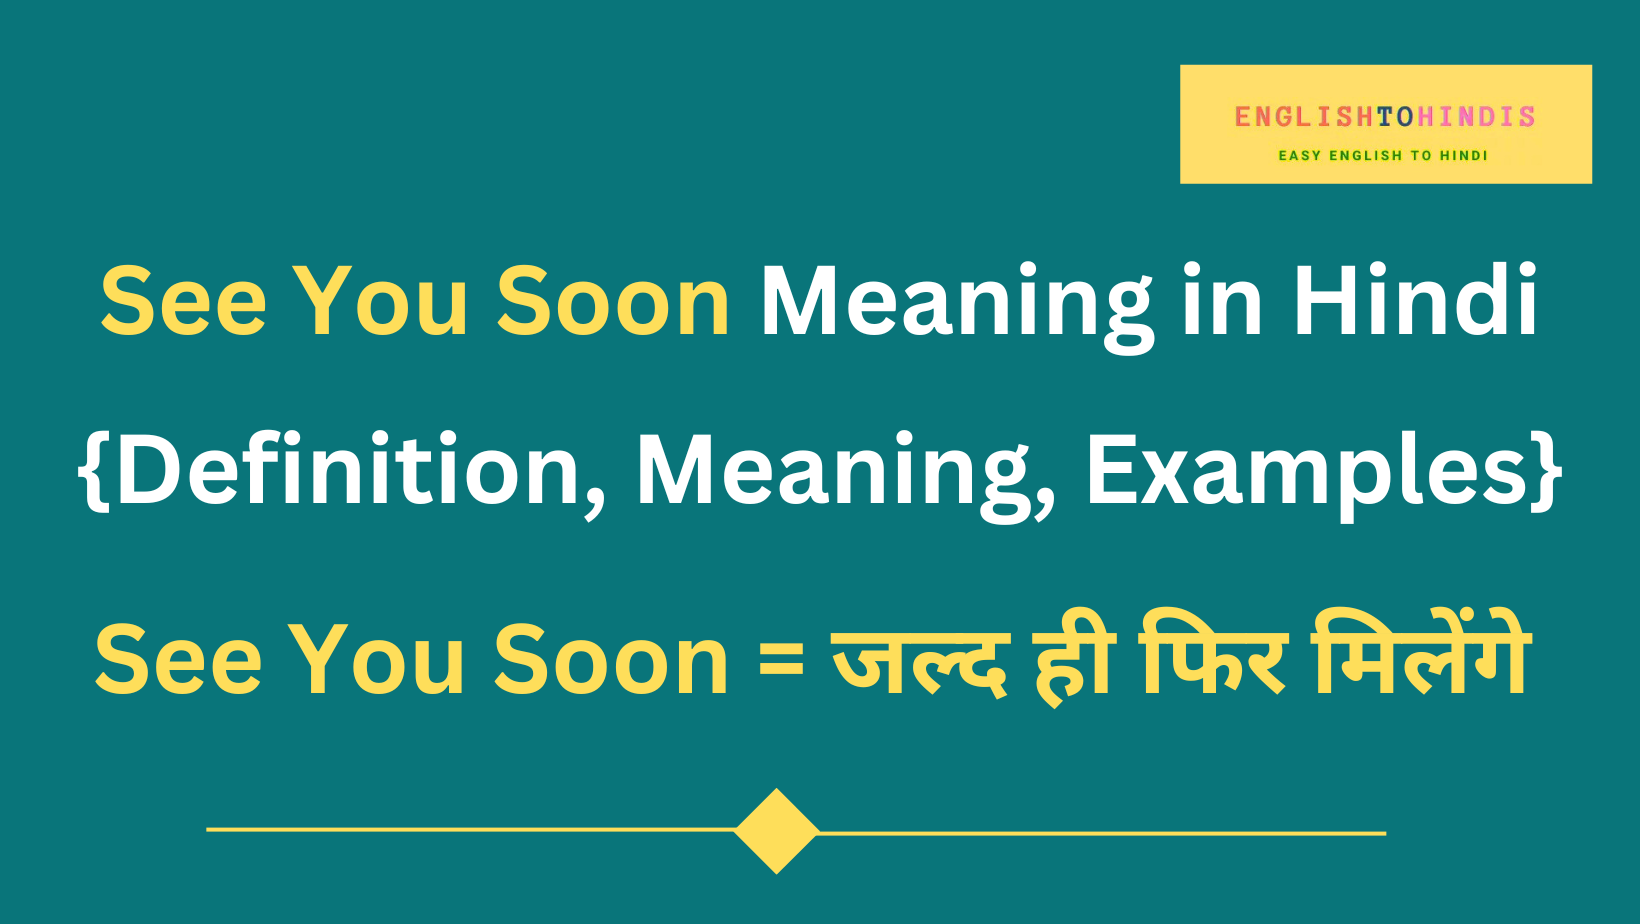 See You Soon Meaning in Hindi